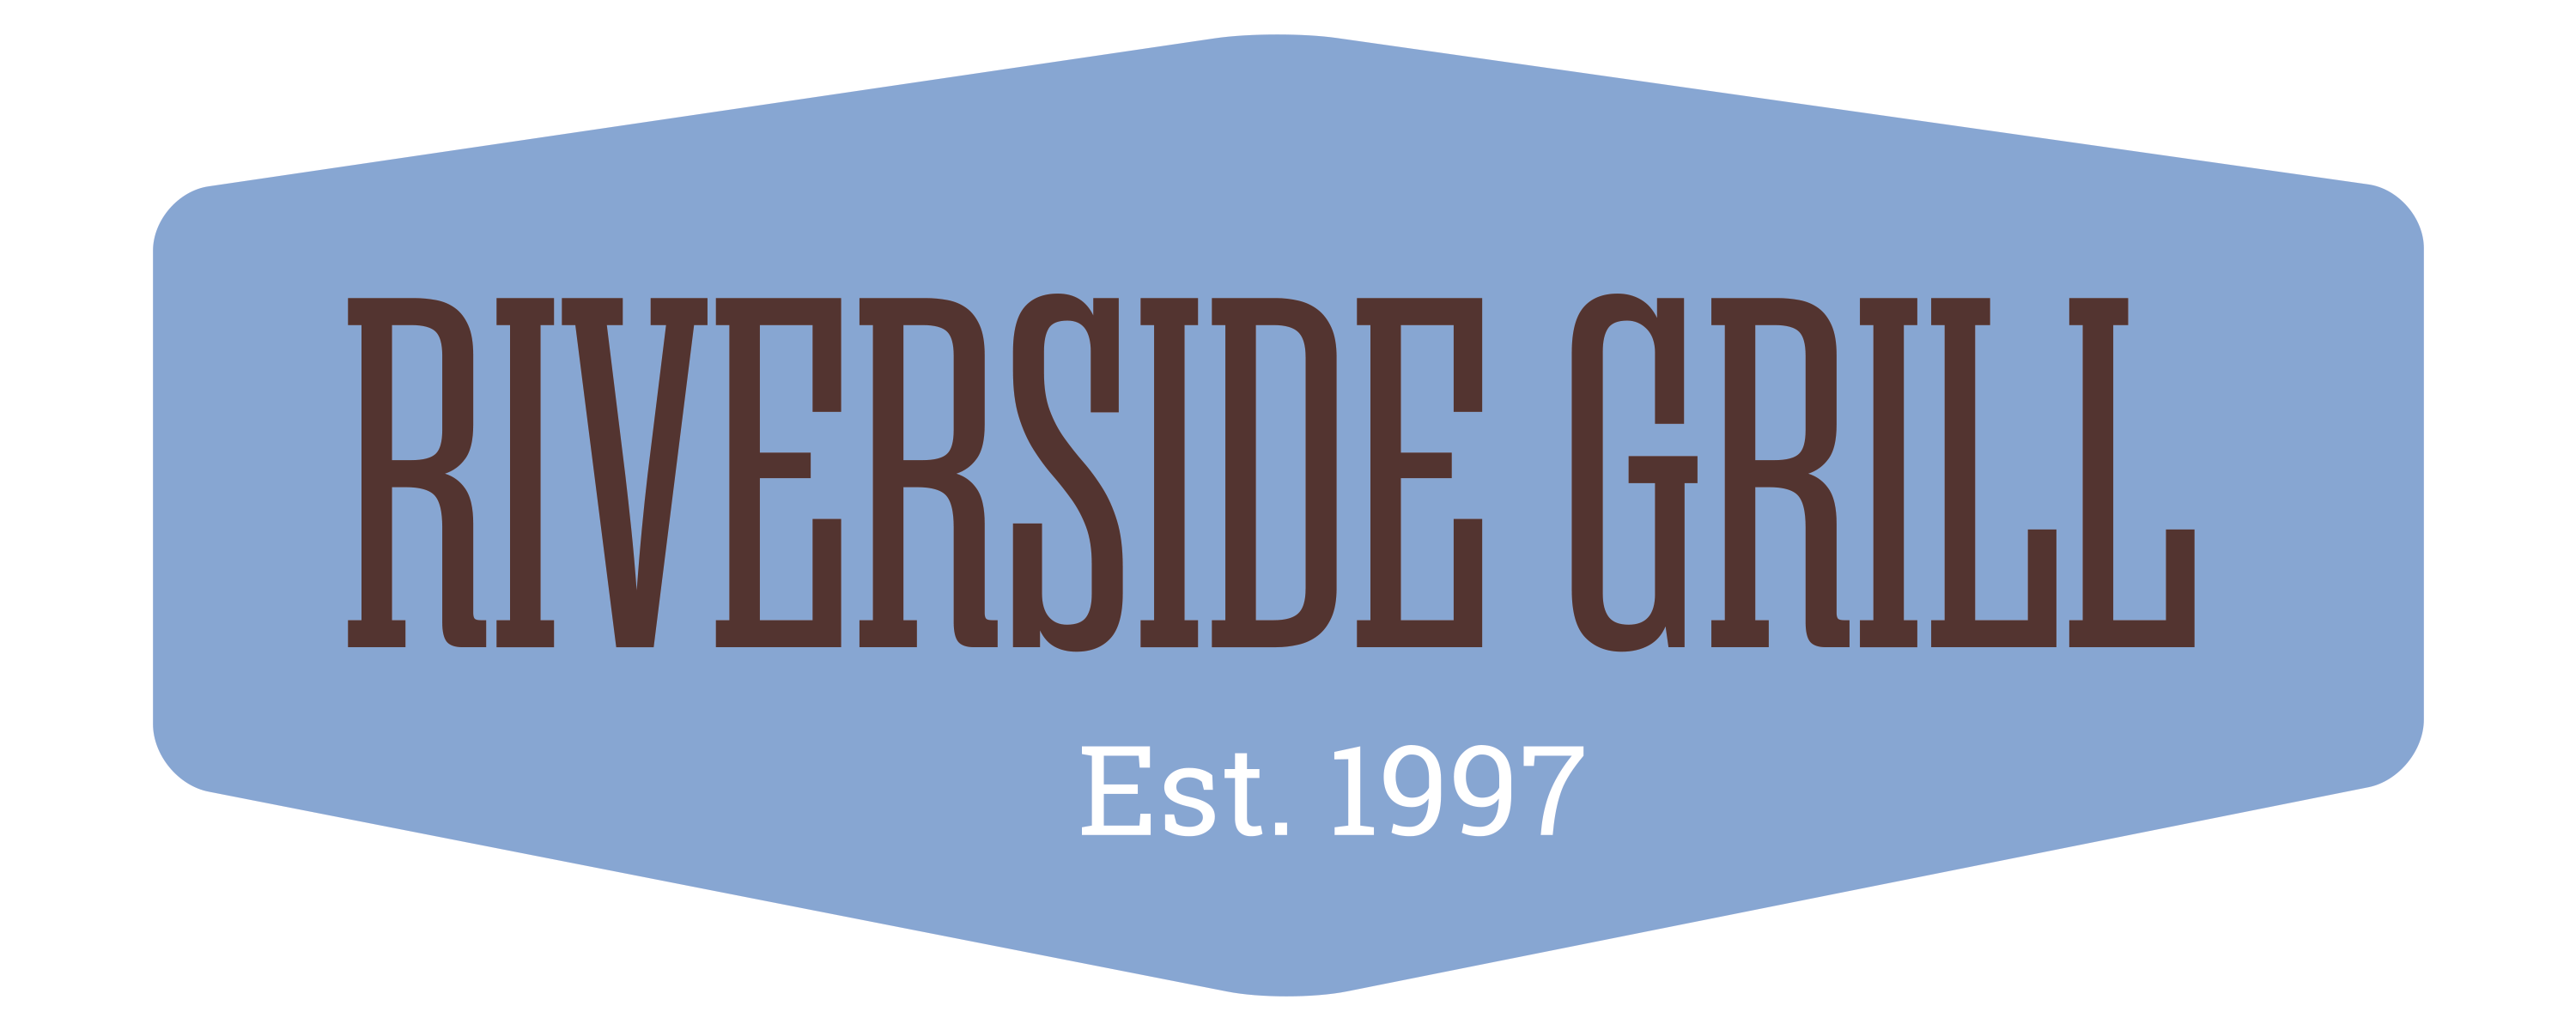 Riverside Grill Home